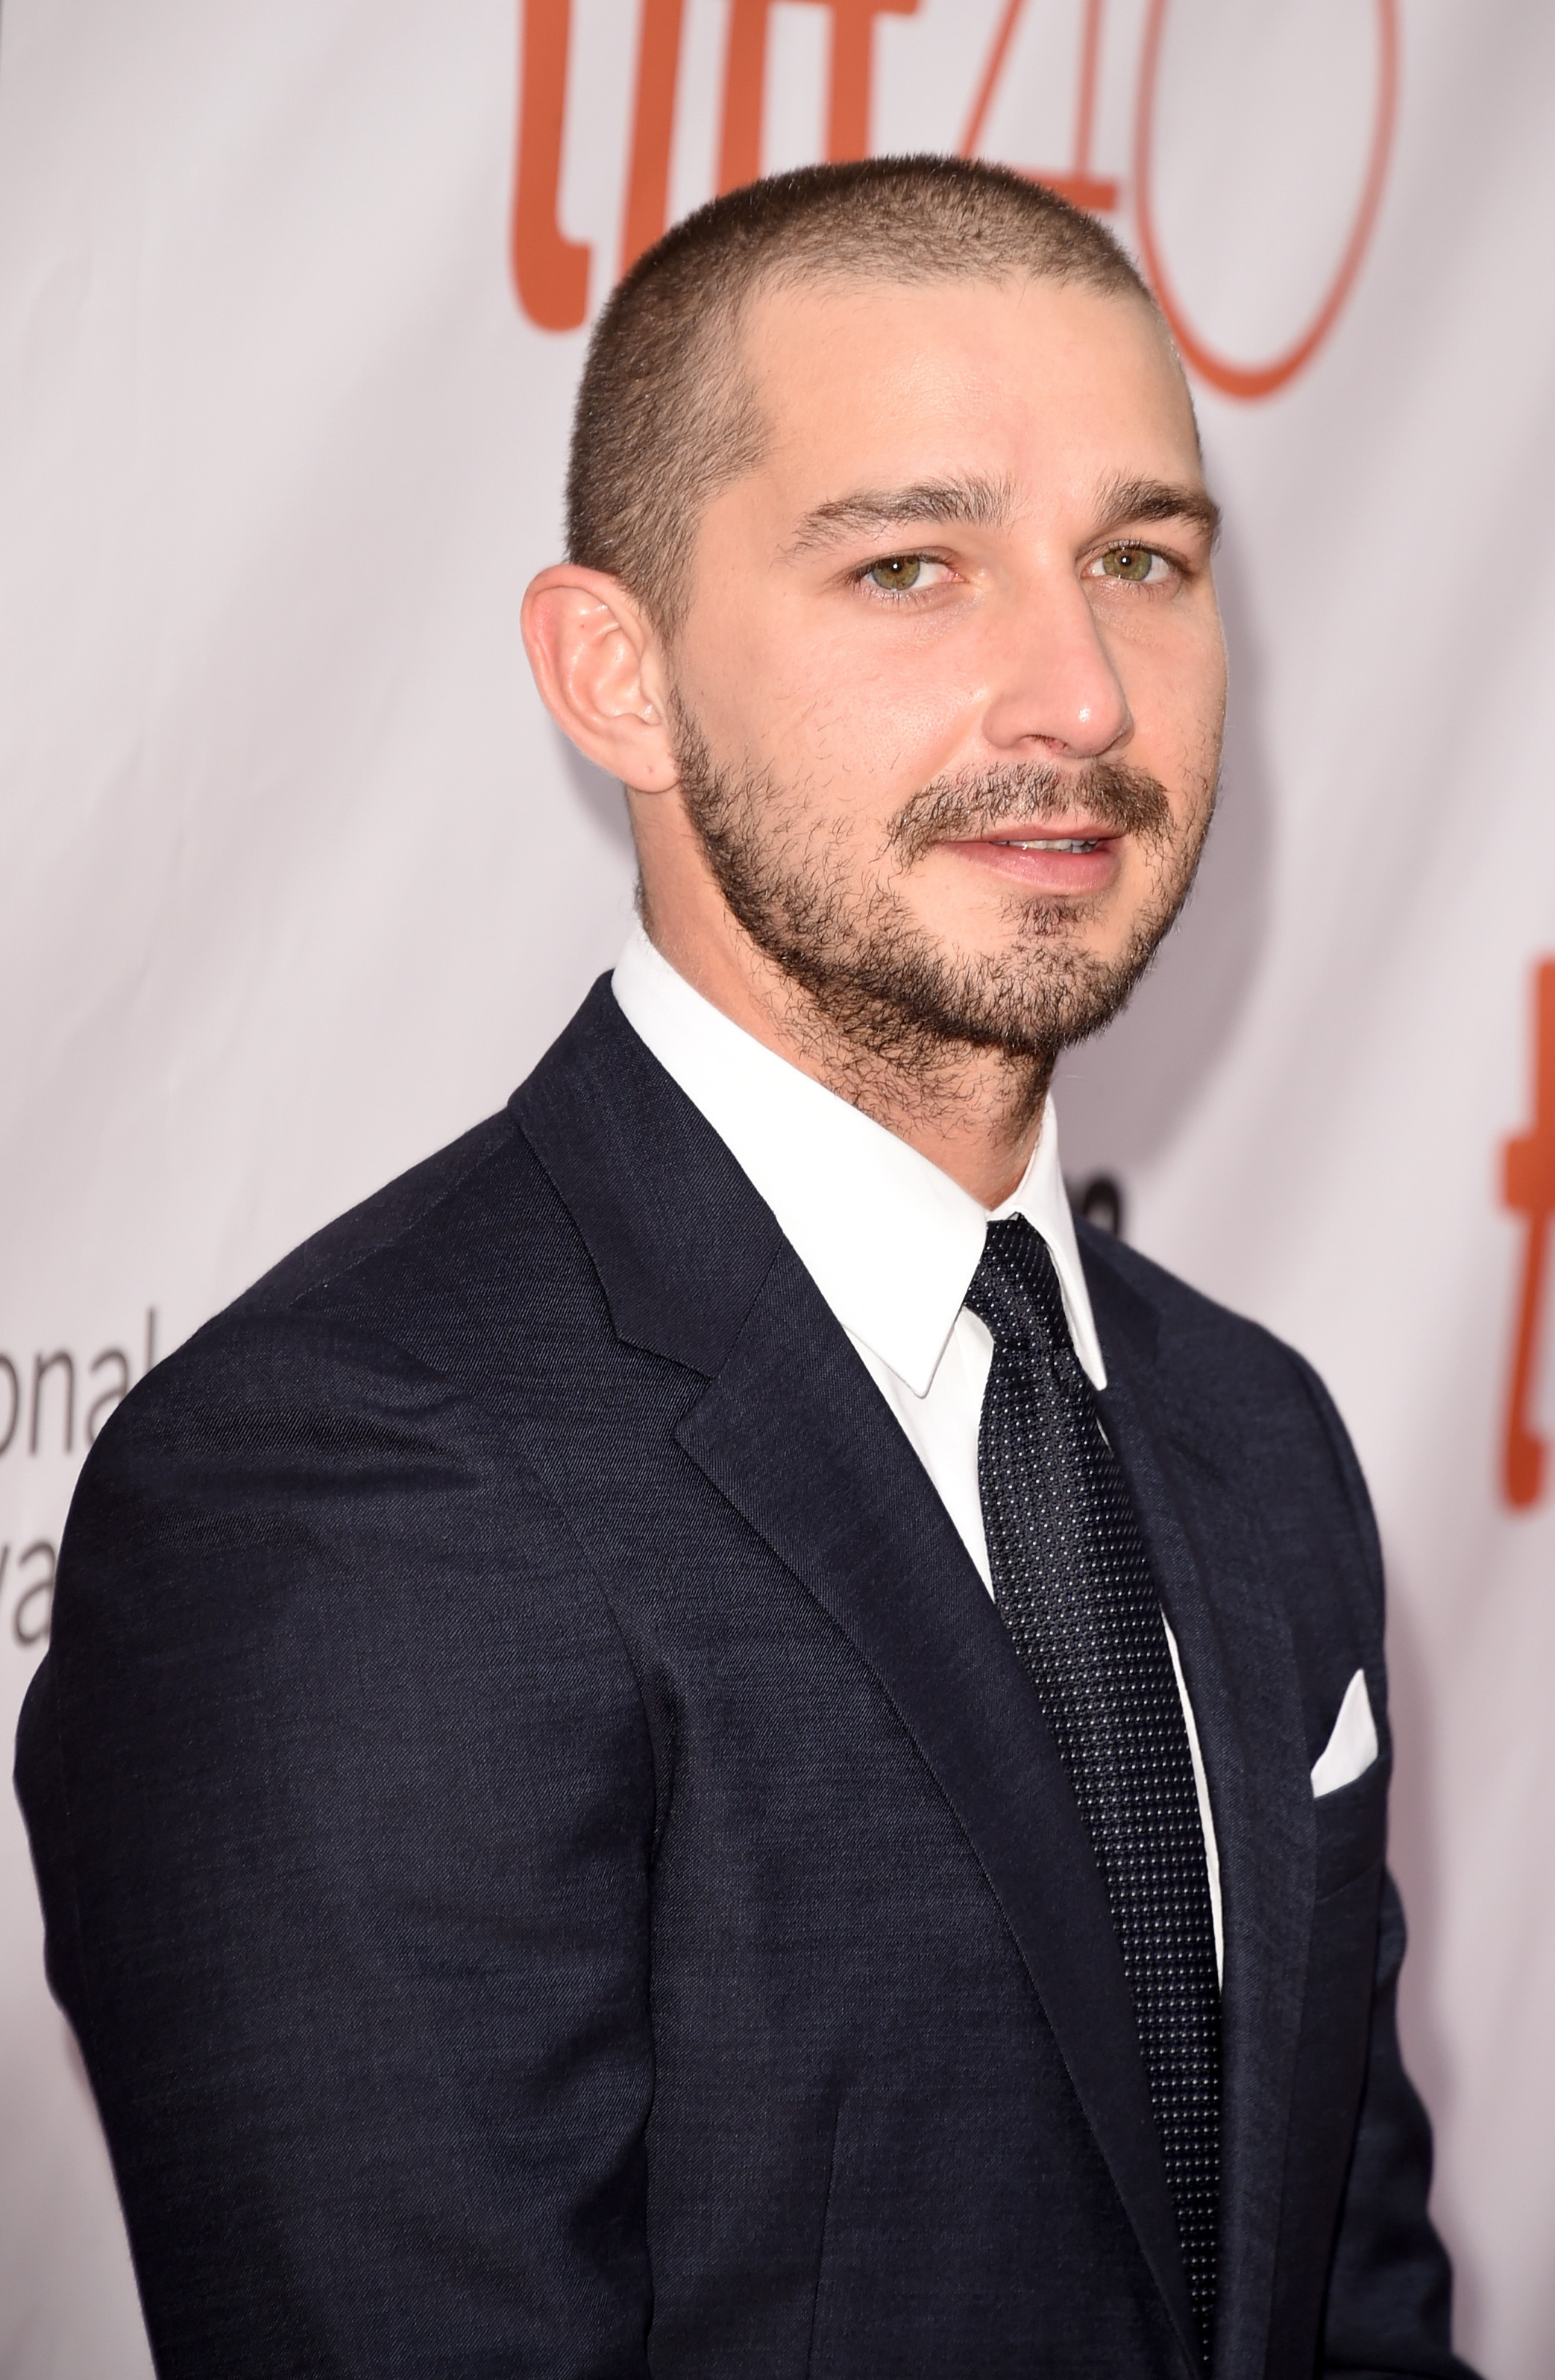 A Shia LaBeouf Look-alike Was Punched In The Face For Resembling The Actor (Yes, This ...2085 x 3192